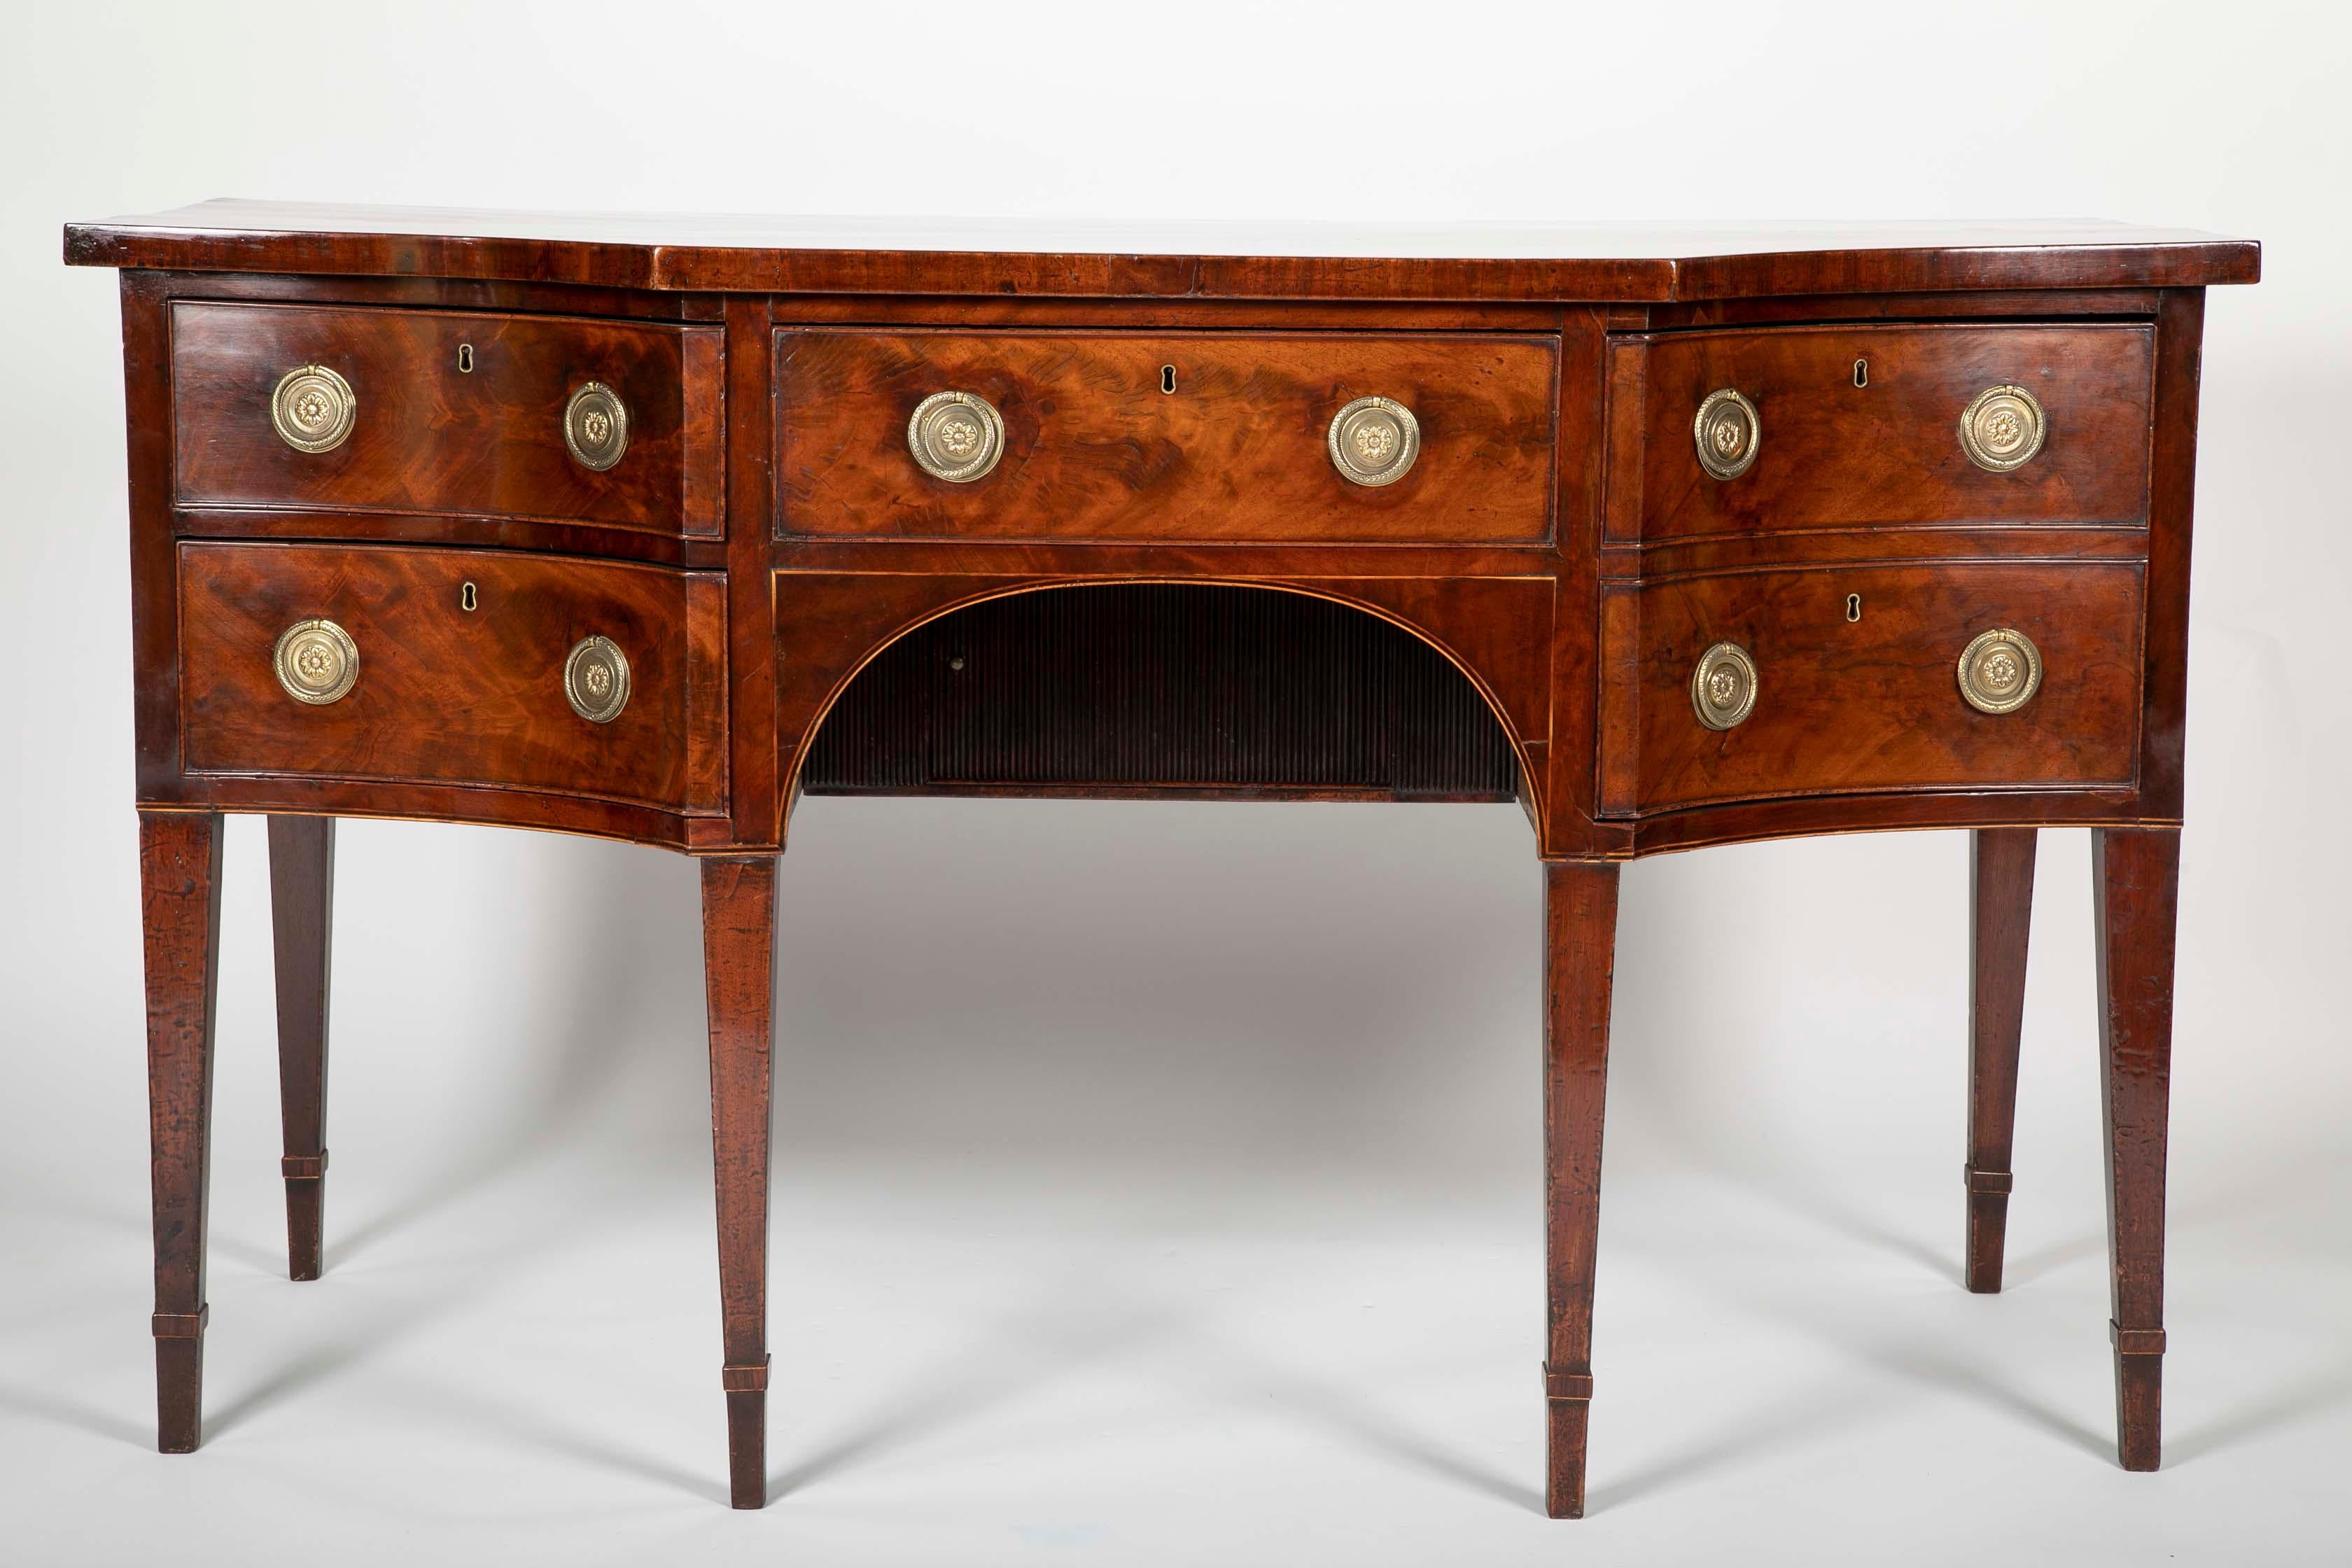 A mahogany sideboard with flat front and concave sides. English Regency. Provenance- loaned to WM Underwoood by G.C. Seybolt, early 19th century.